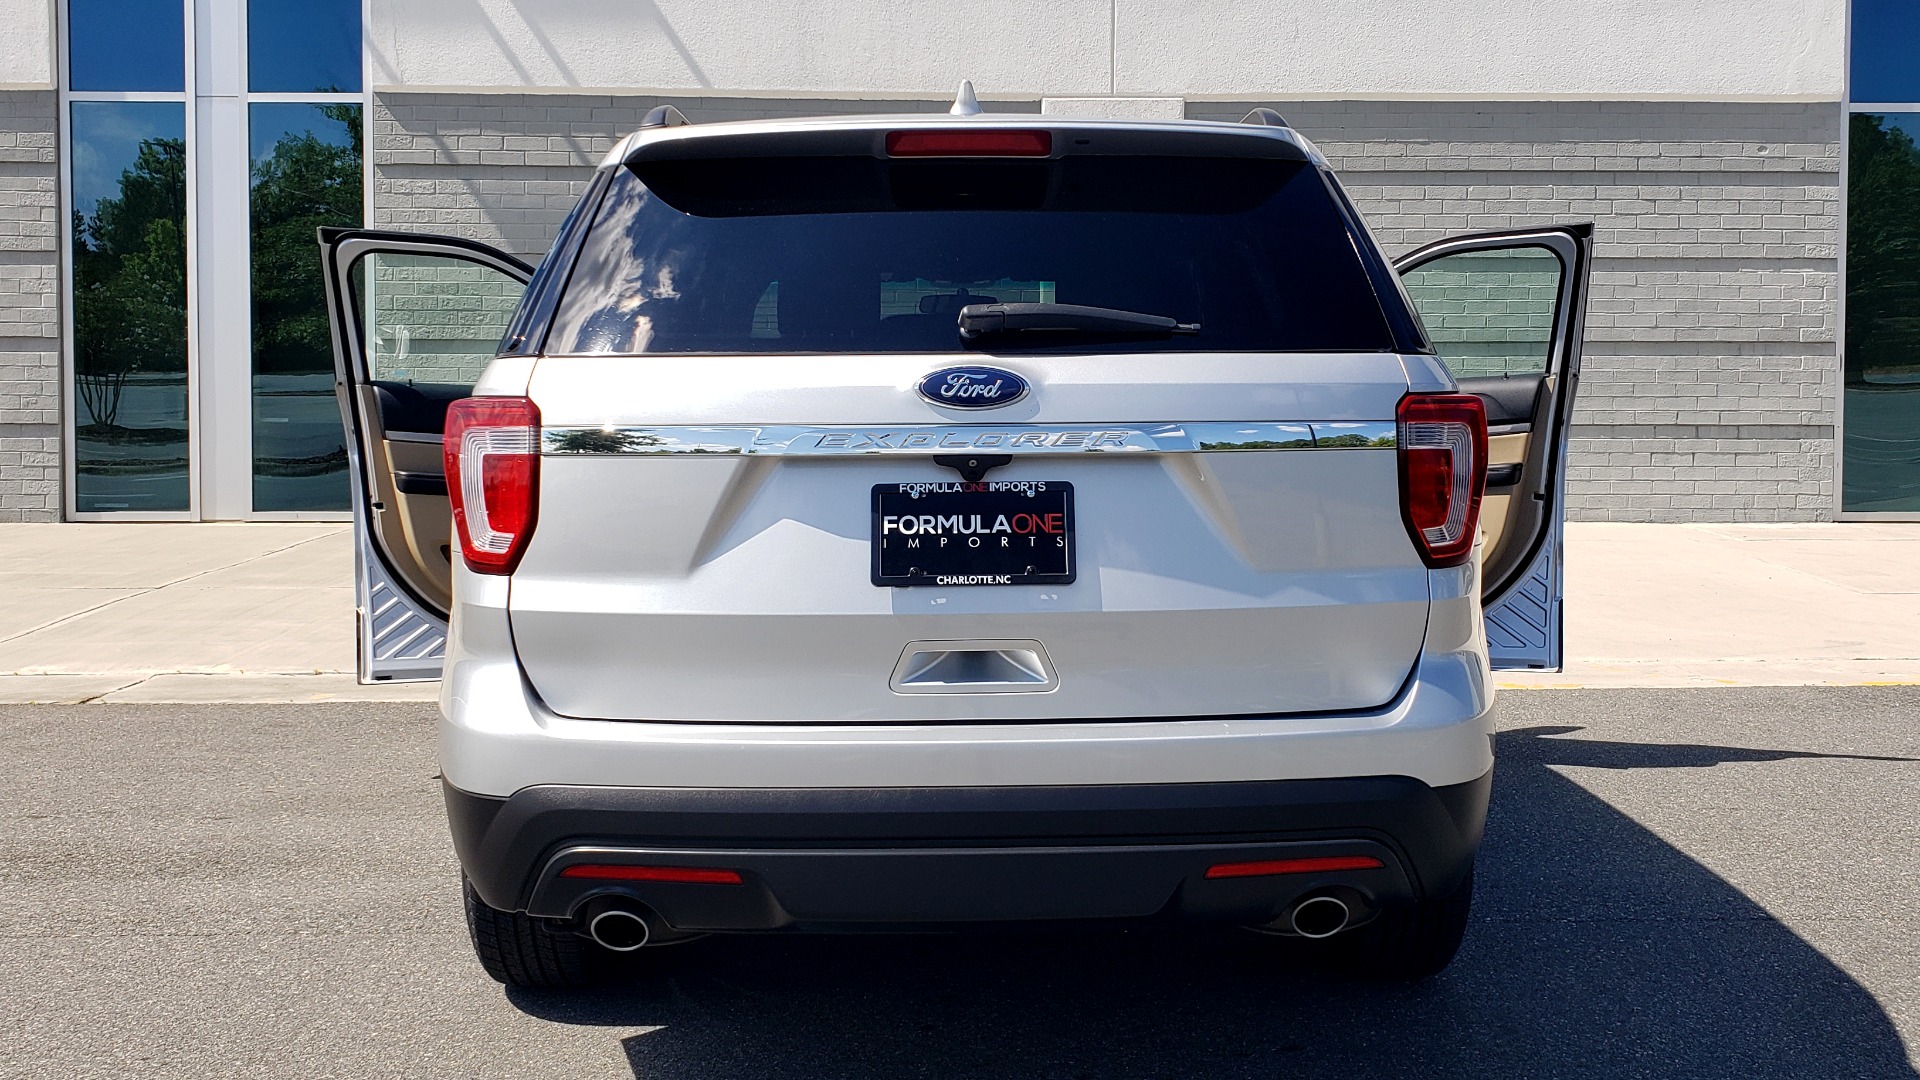 Used 2017 Ford EXPLORER 3.5L V6 / 6-SPD AUTO / BLIND SPOT MONITOR / 3-ROW / SYNC / REARVIEW for sale Sold at Formula Imports in Charlotte NC 28227 27